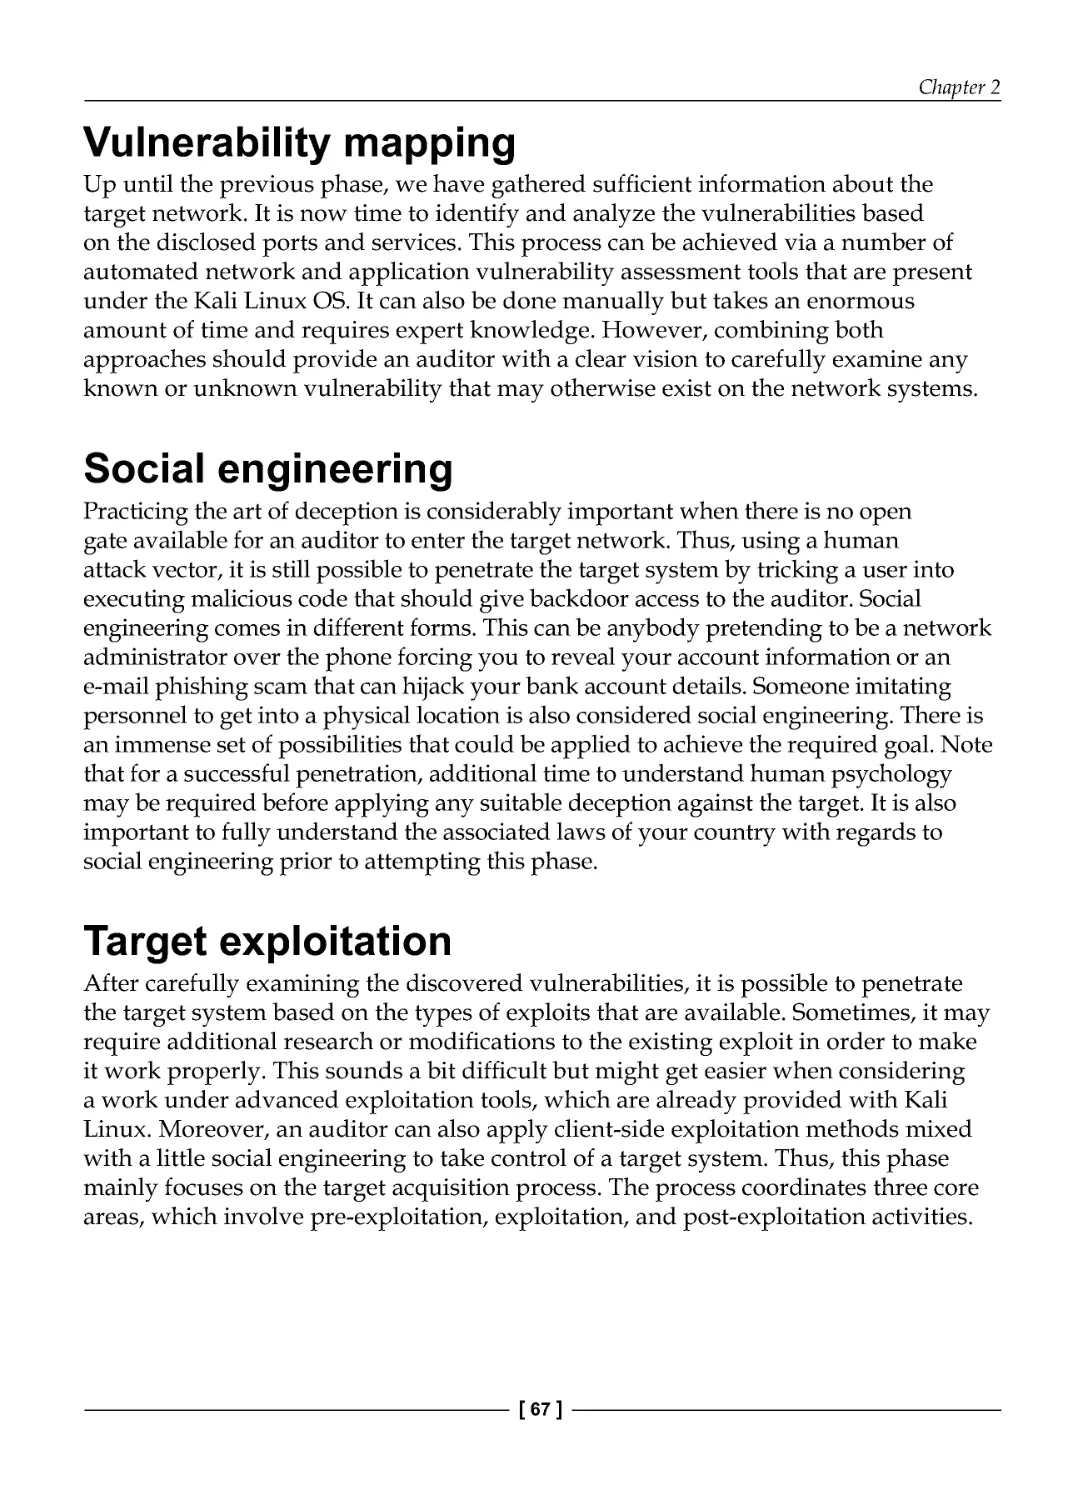 Vulnerability mapping
Social engineering
Target exploitation